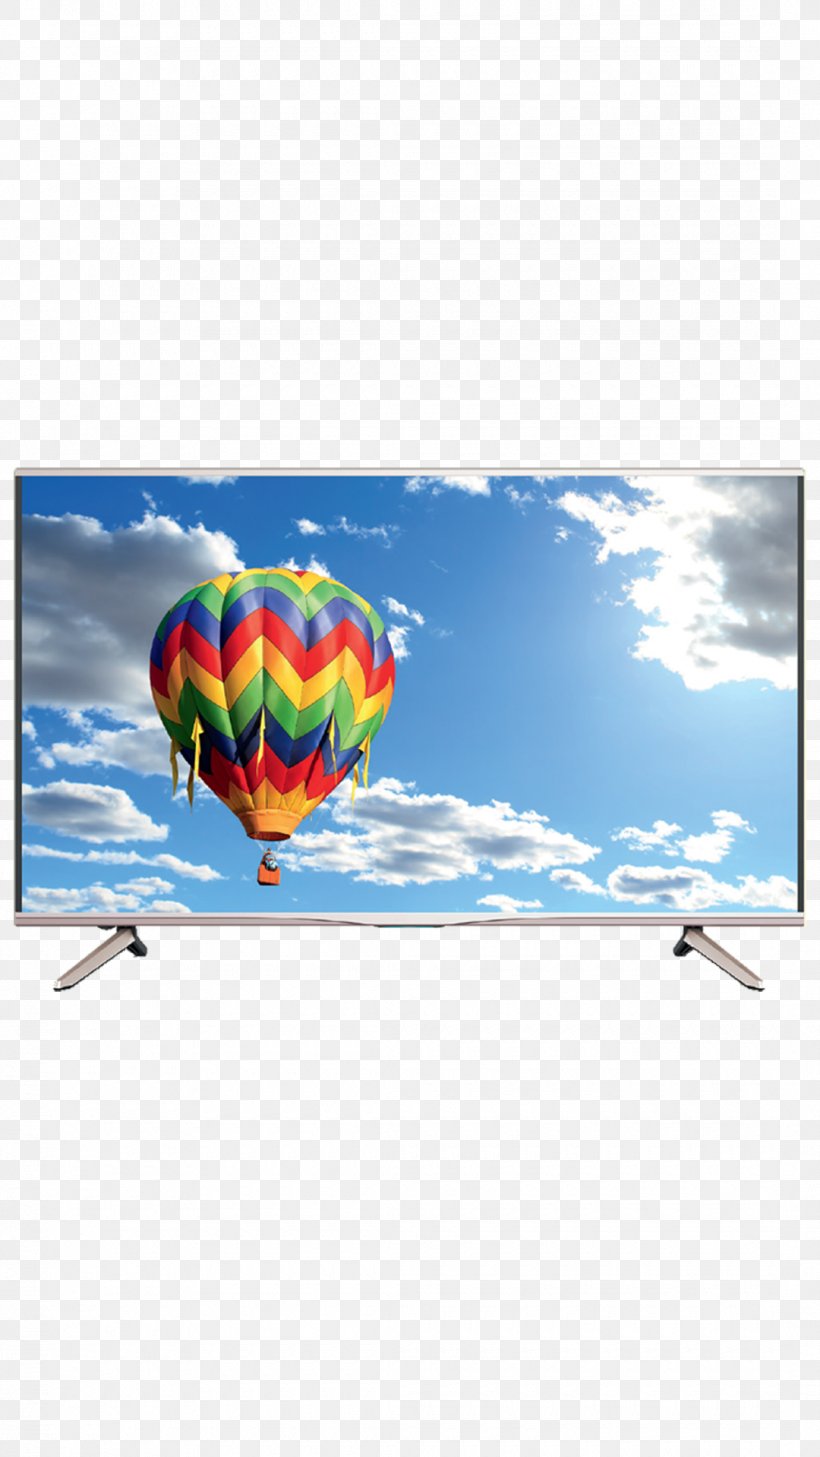 LED-backlit LCD 4K Resolution Sansui Electric Ultra-high-definition Television, PNG, 1080x1920px, 4k Resolution, Ledbacklit Lcd, Balloon, Hdmi, Highdefinition Television Download Free